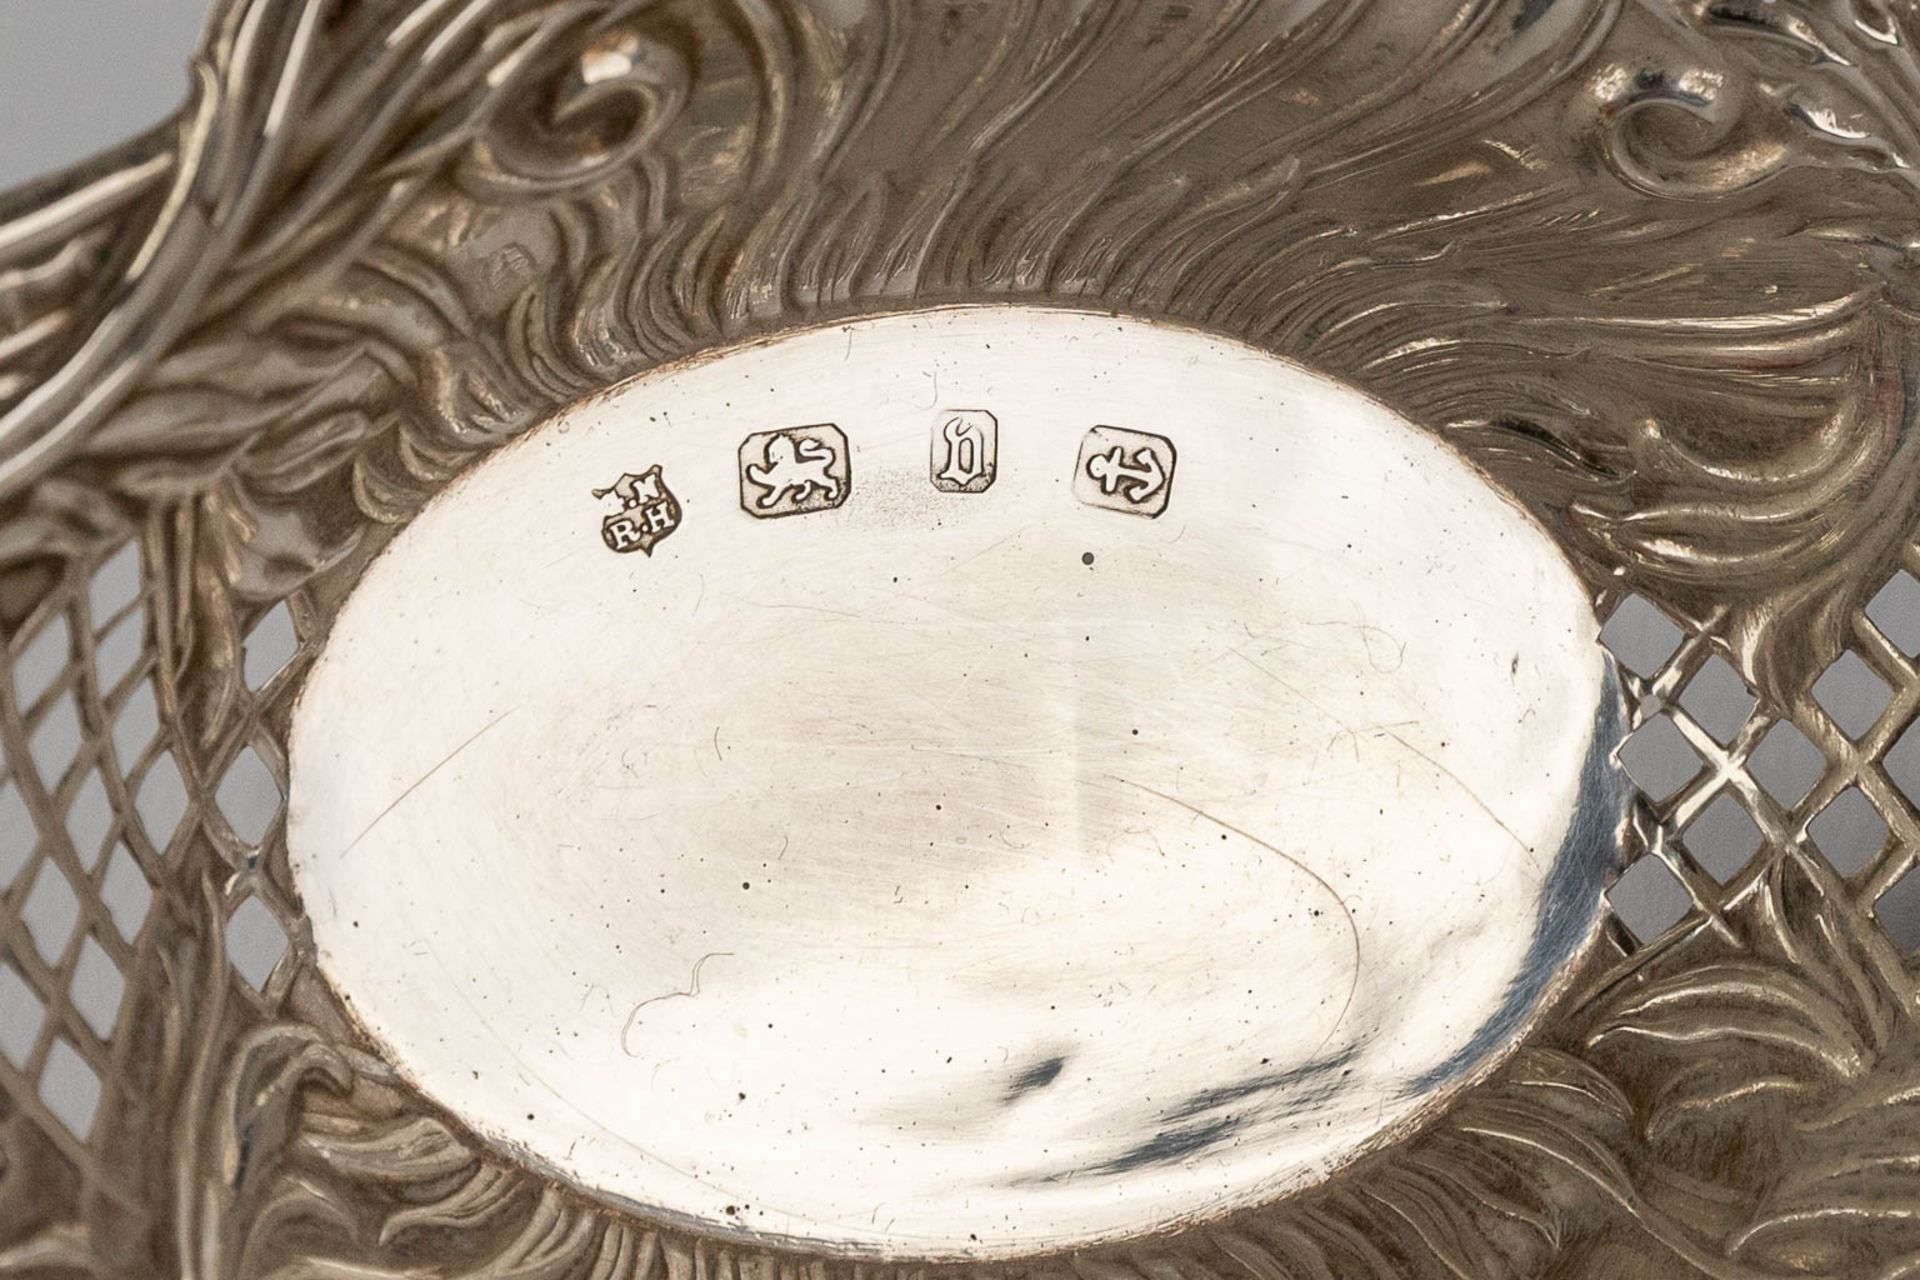 Large collection of silver items, Mostly England. 19th C. Total gross weight: 2915g. (W:22 x H:14 cm - Image 9 of 30